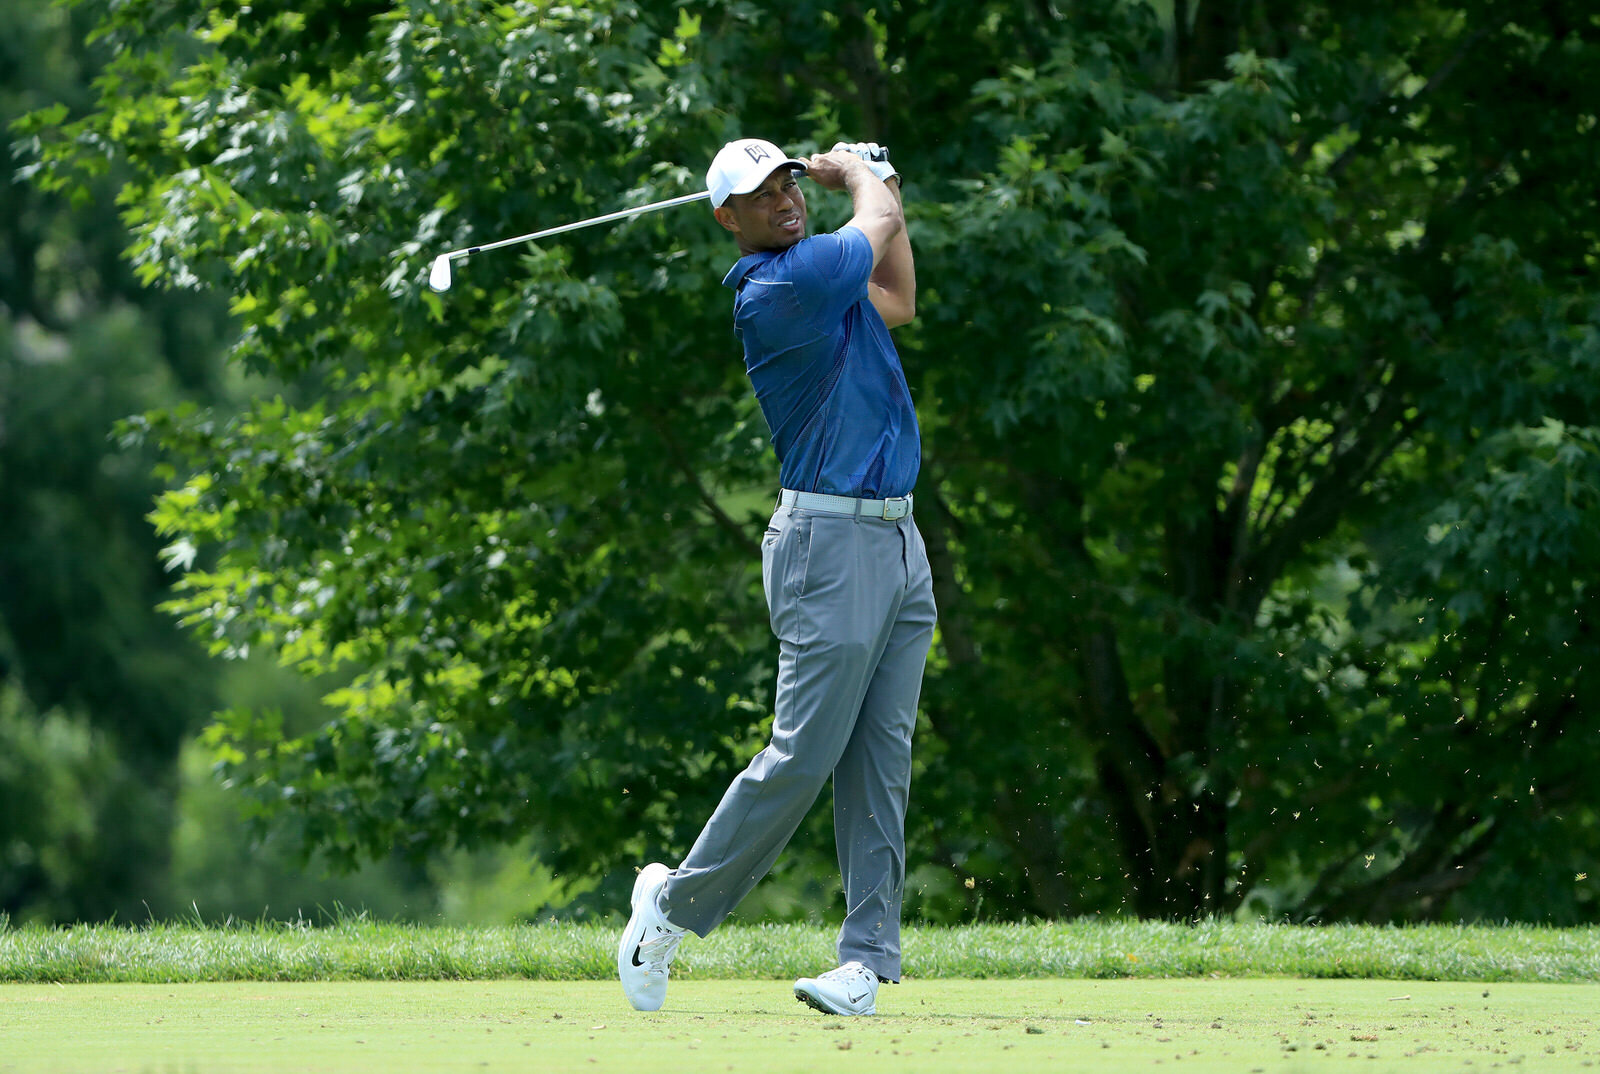  DUBLIN, OHIO - JULY 17: Tiger Woods of the United States plays his shot from the fourth tee during the second round of The Memorial Tournament on July 17, 2020 at Muirfield Village Golf Club in Dublin, Ohio. (Photo by Sam Greenwood/Getty Images) 